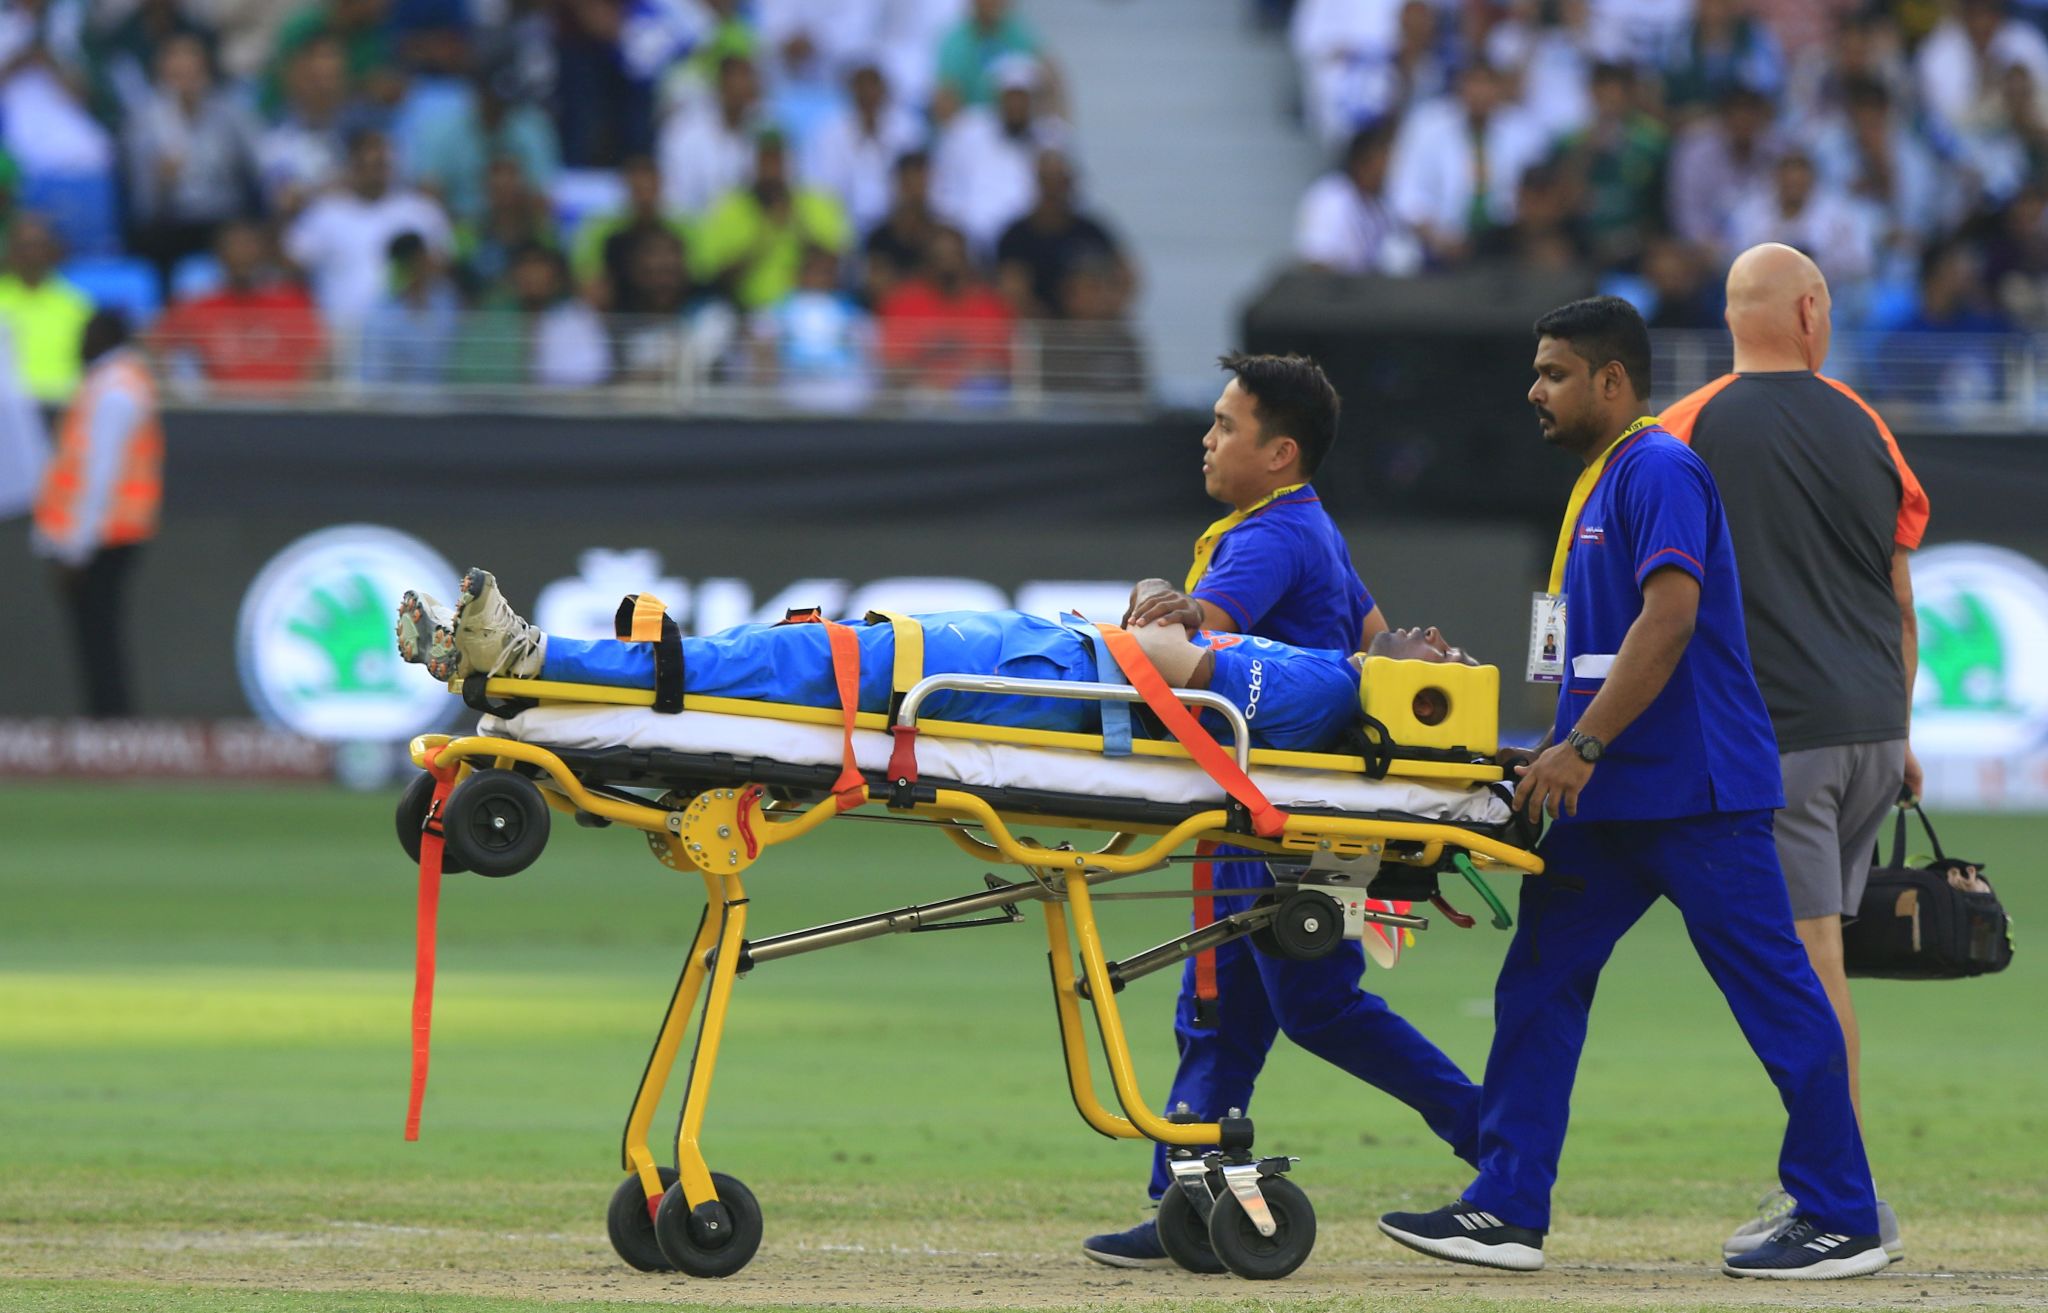 IND vs PAK LIVE: From being stretchered OFF in 2018, Hardik Pandya gets his REDEMPTION vs Pakistan, India vs Pakistan Highlights, Asia Cup 2022 LIVE